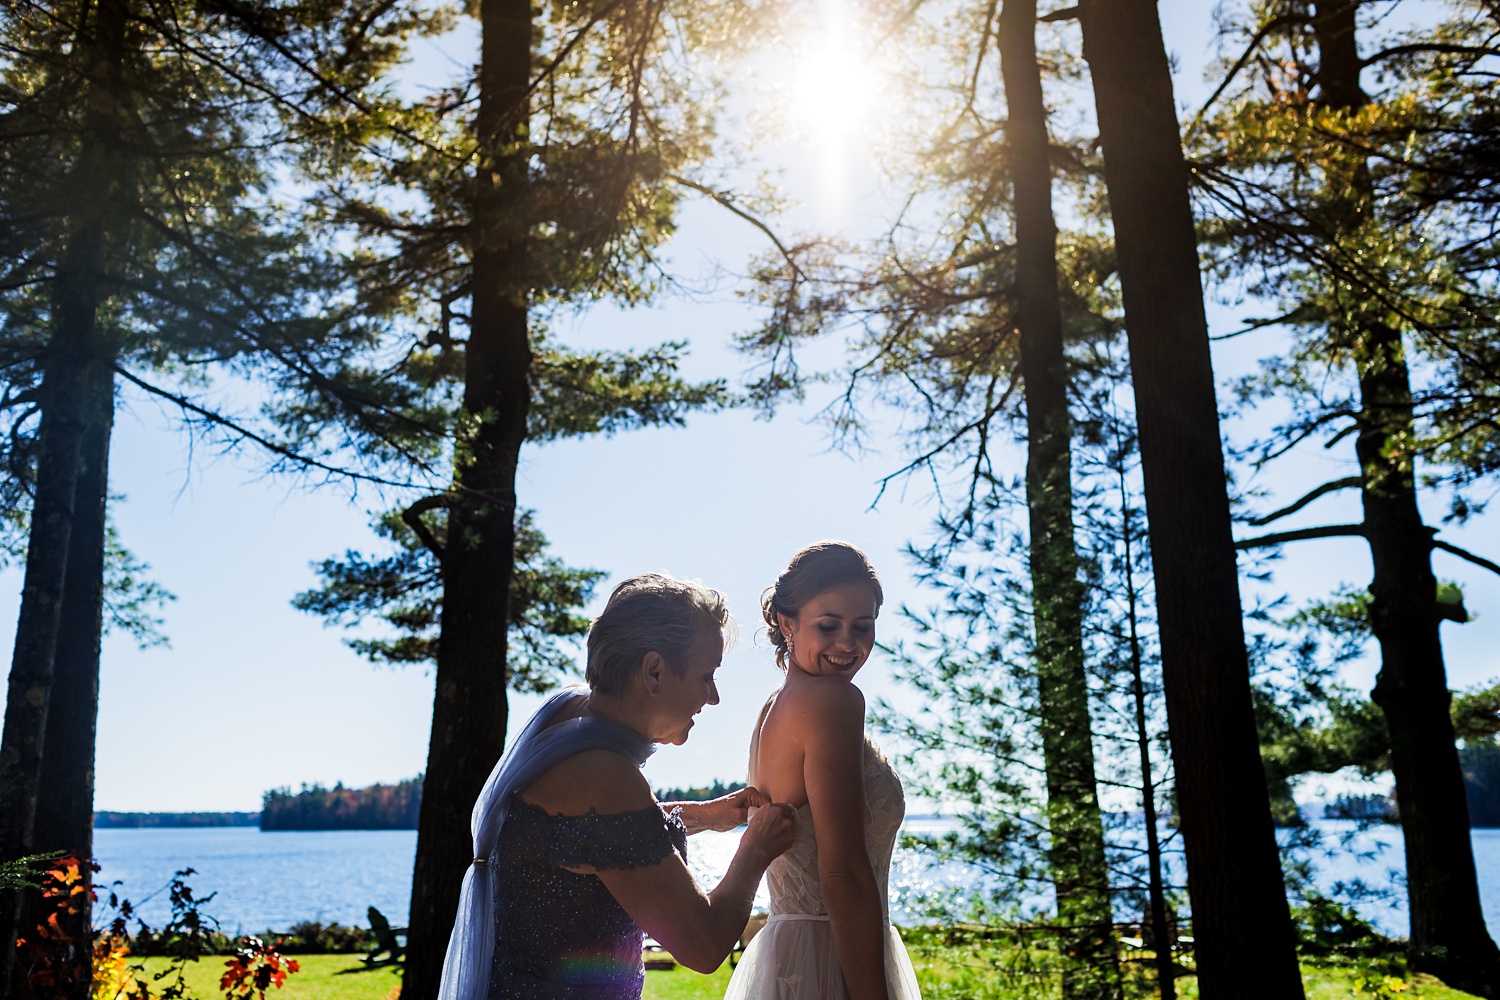 The bride and her mom get her into her wedding dress at Migis Lodge Resort in Maine with Sebago Lake in the distance